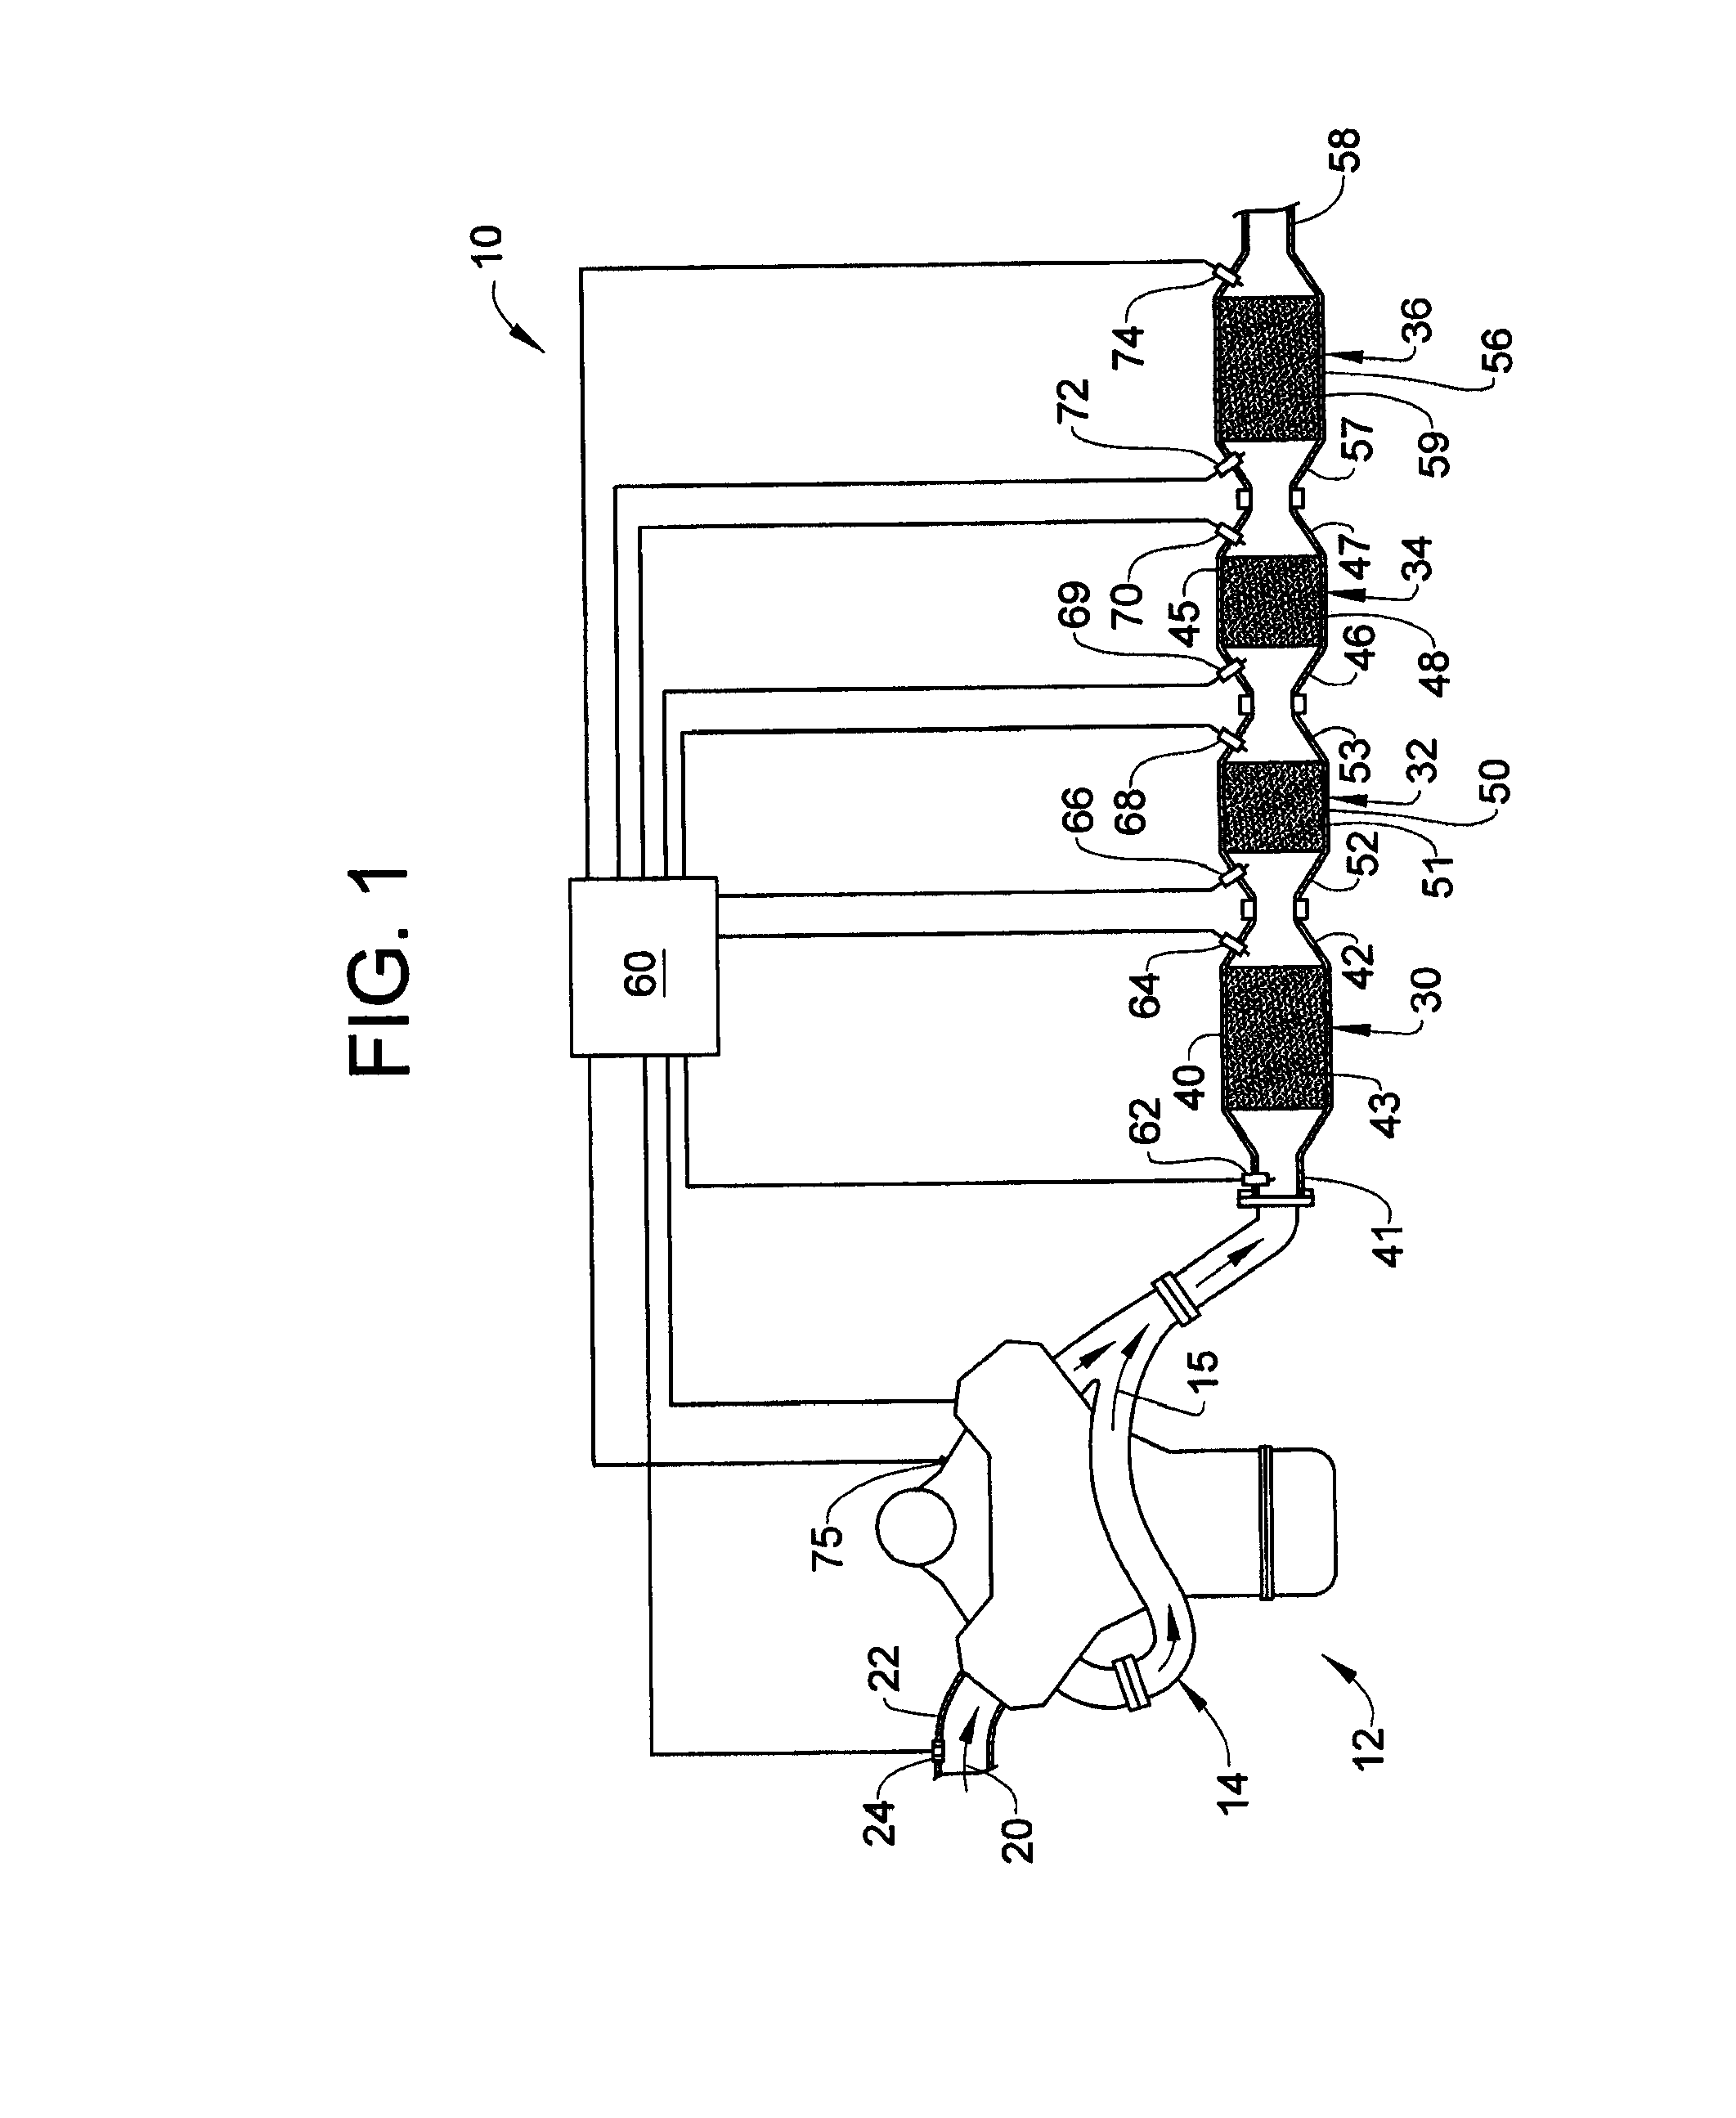 Particulate filter device monitoring system for an internal combustion engine